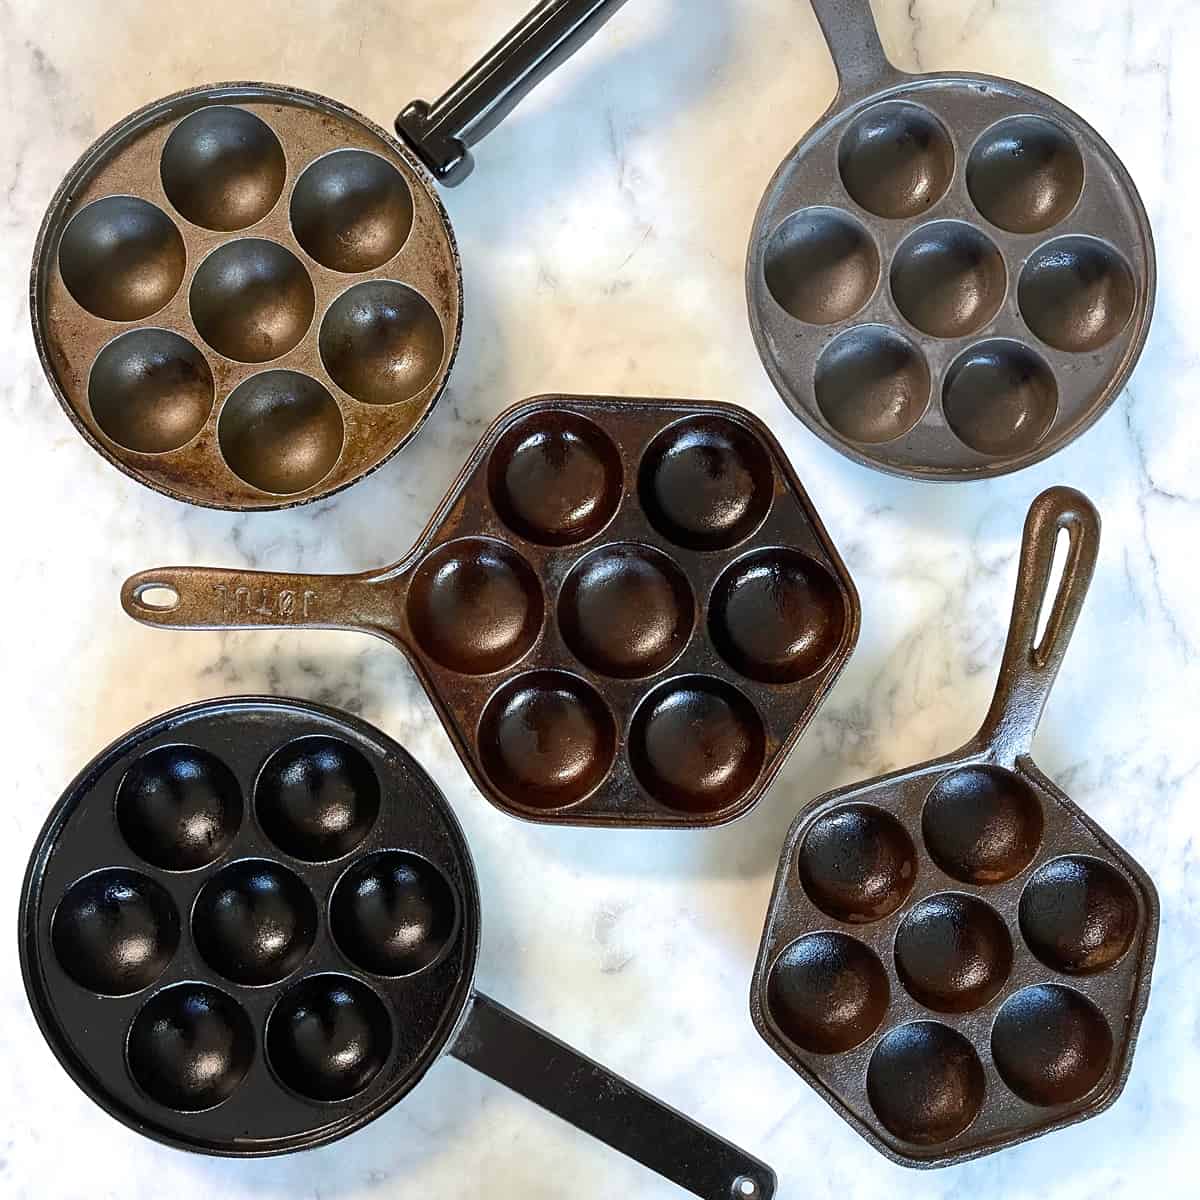 How to Make Lemon AEbleskivers prepared in a Lodge Cast Iron Pan 